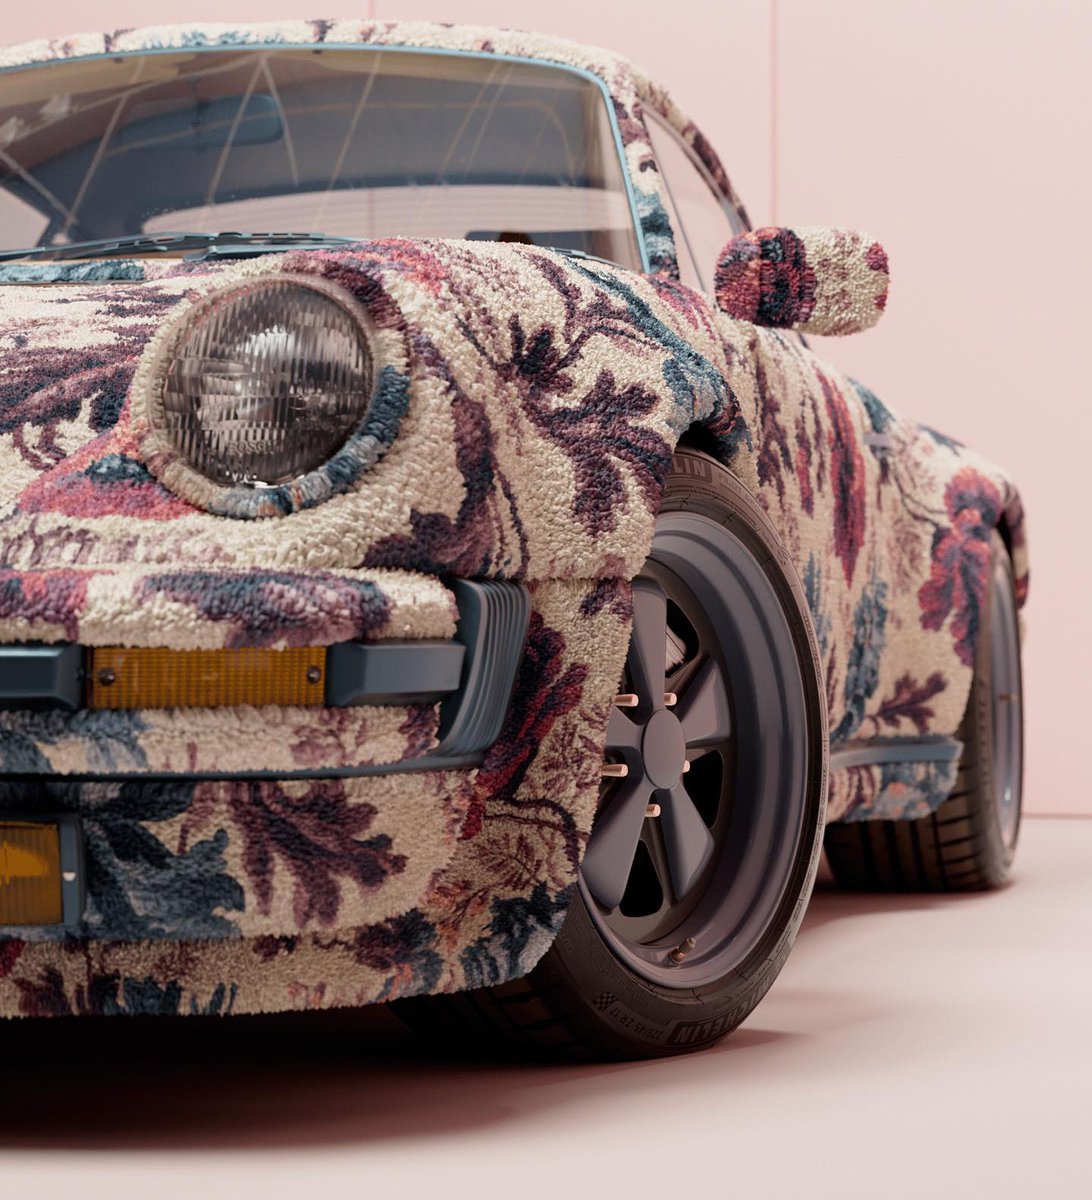 3D from Barcelona, has elevated his latest research in fabrics and textiles to new heights. His exceptional blend of art direction and the timeless aesthetic of a #Porsche 911 is a sight to behold, showcasing his extraordinary talent and meticulous attention to detail.